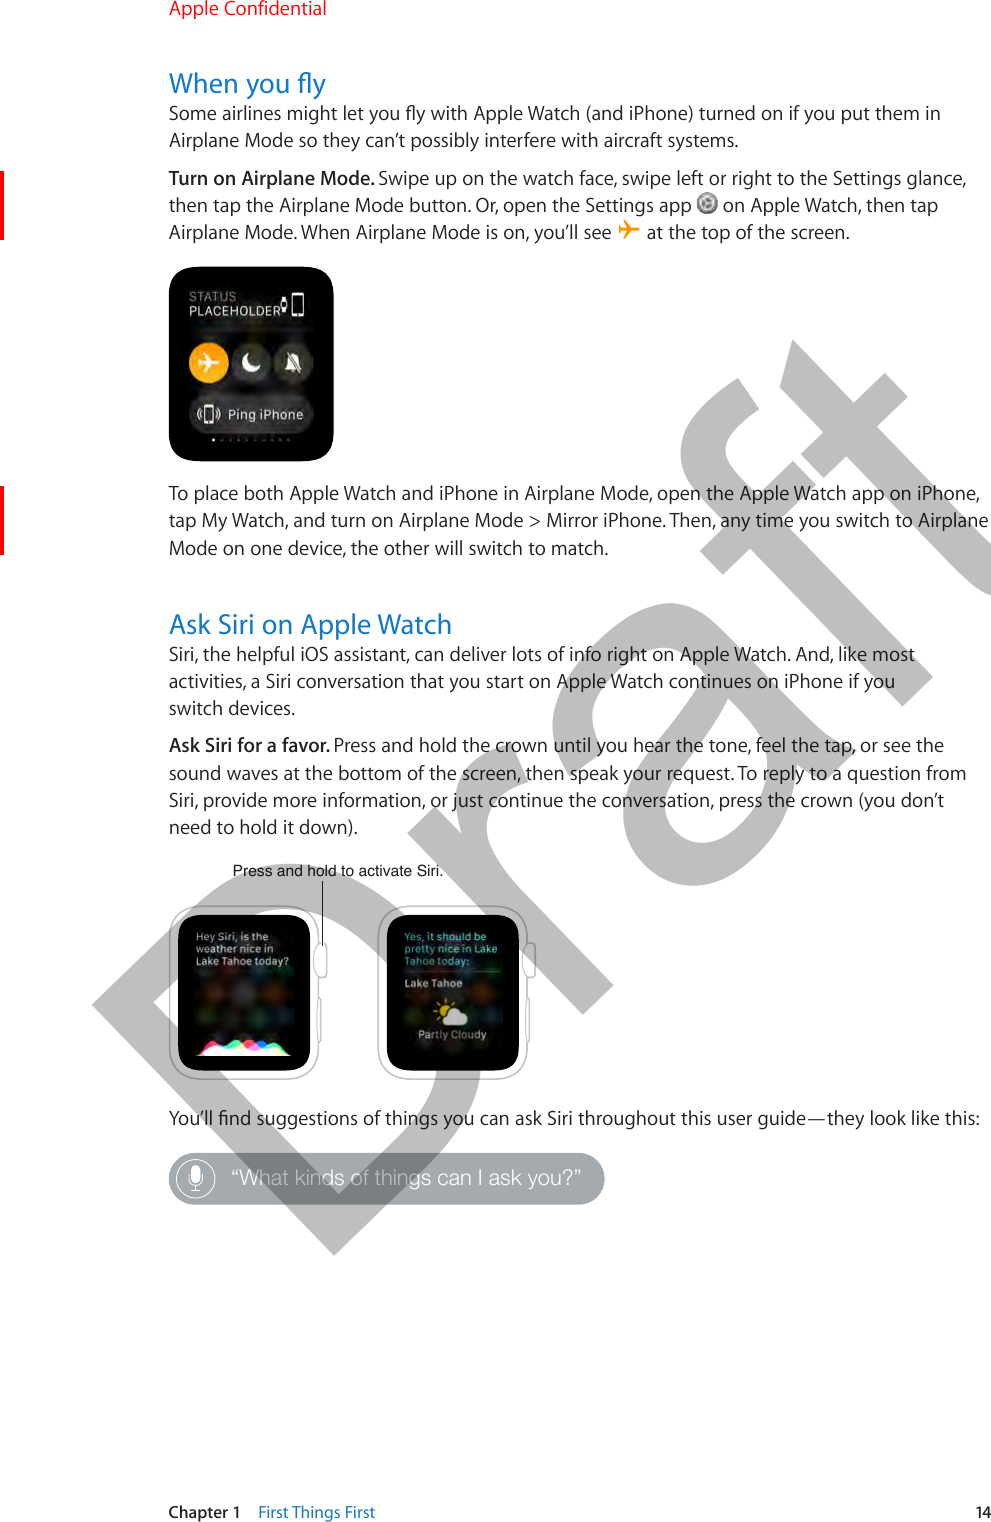 Chapter 1    First Things First  14When you ySome airlines might let you y with Apple Watch (and iPhone) turned on if you put them in Airplane Mode so they can’t possibly interfere with aircraft systems.Turn on Airplane Mode. Swipe up on the watch face, swipe left or right to the Settings glance, then tap the Airplane Mode button. Or, open the Settings app   on Apple Watch, then tap Airplane Mode. When Airplane Mode is on, you’ll see   at the top of the screen.To place both Apple Watch and iPhone in Airplane Mode, open the Apple Watch app on iPhone, tap My Watch, and turn on Airplane Mode &gt; Mirror iPhone. Then, any time you switch to Airplane Mode on one device, the other will switch to match.Ask Siri on Apple WatchSiri, the helpful iOS assistant, can deliver lots of info right on Apple Watch. And, like most activities, a Siri conversation that you start on Apple Watch continues on iPhone if you switch devices.Ask Siri for a favor. Press and hold the crown until you hear the tone, feel the tap, or see the sound waves at the bottom of the screen, then speak your request. To reply to a question from Siri, provide more information, or just continue the conversation, press the crown (you don’t need to hold it down).Press and hold to activate Siri.You’ll nd suggestions of things you can ask Siri throughout this user guide—they look like this:“What kinds of things can I ask you?”Apple Confidential  100% resize factorDraft